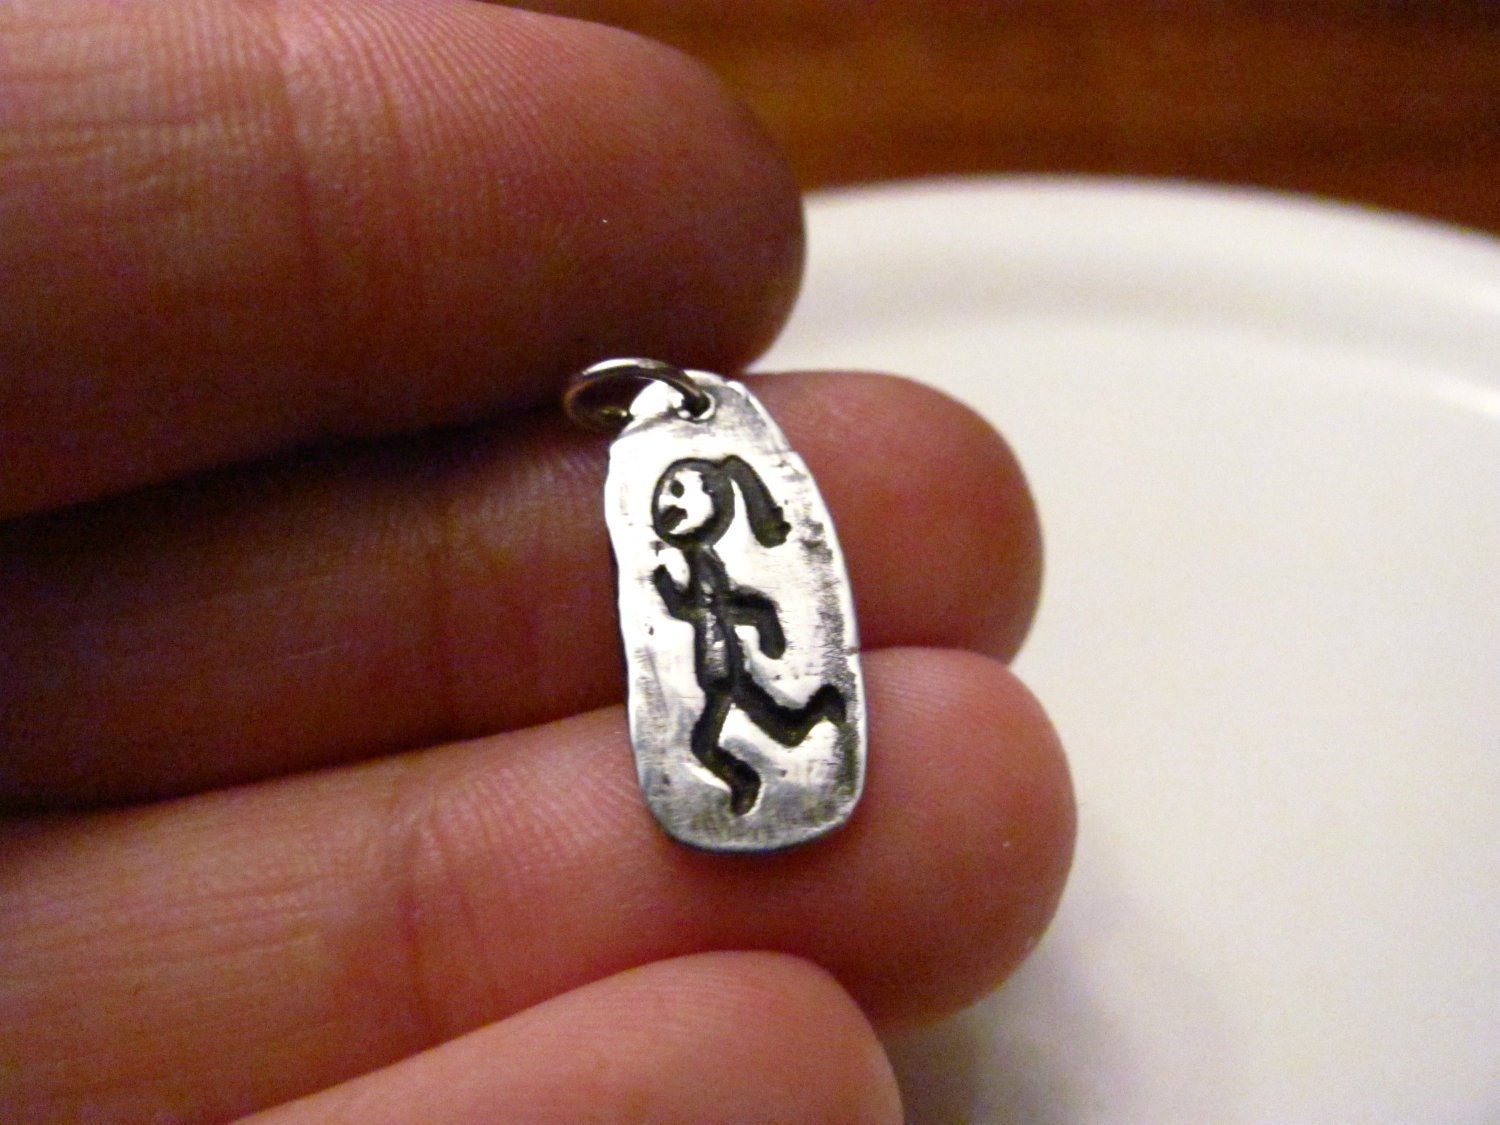 Jogging, Running Girl Charm - Charm Only - My Life Charms - Free Shipping in the US